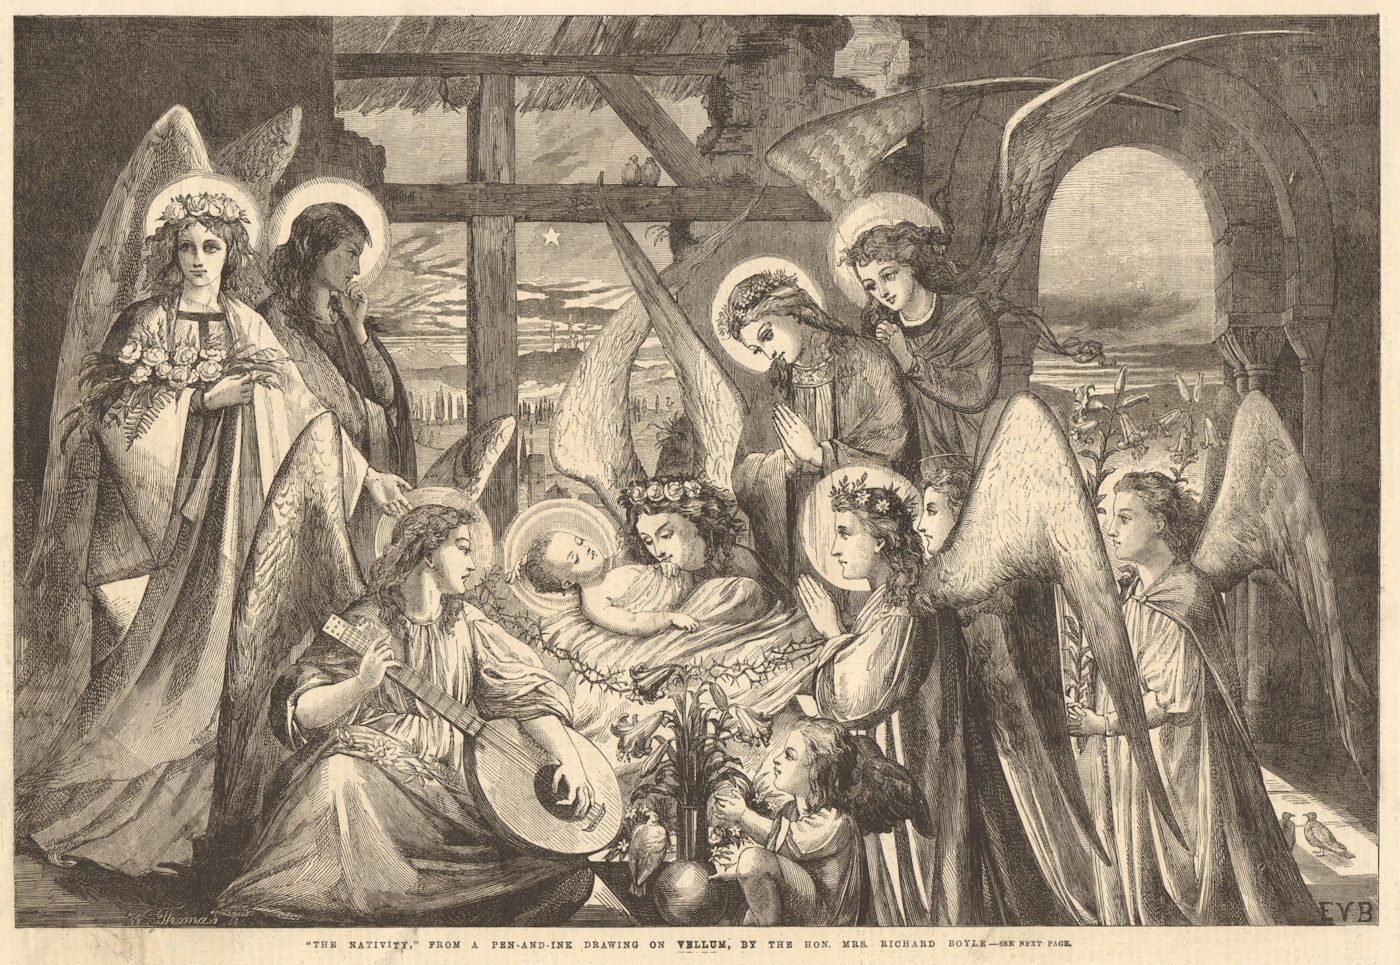 Associate Product "The nativity", by the Hon. Mrs. Richard Boyle. Bible 1863 ILN full page print